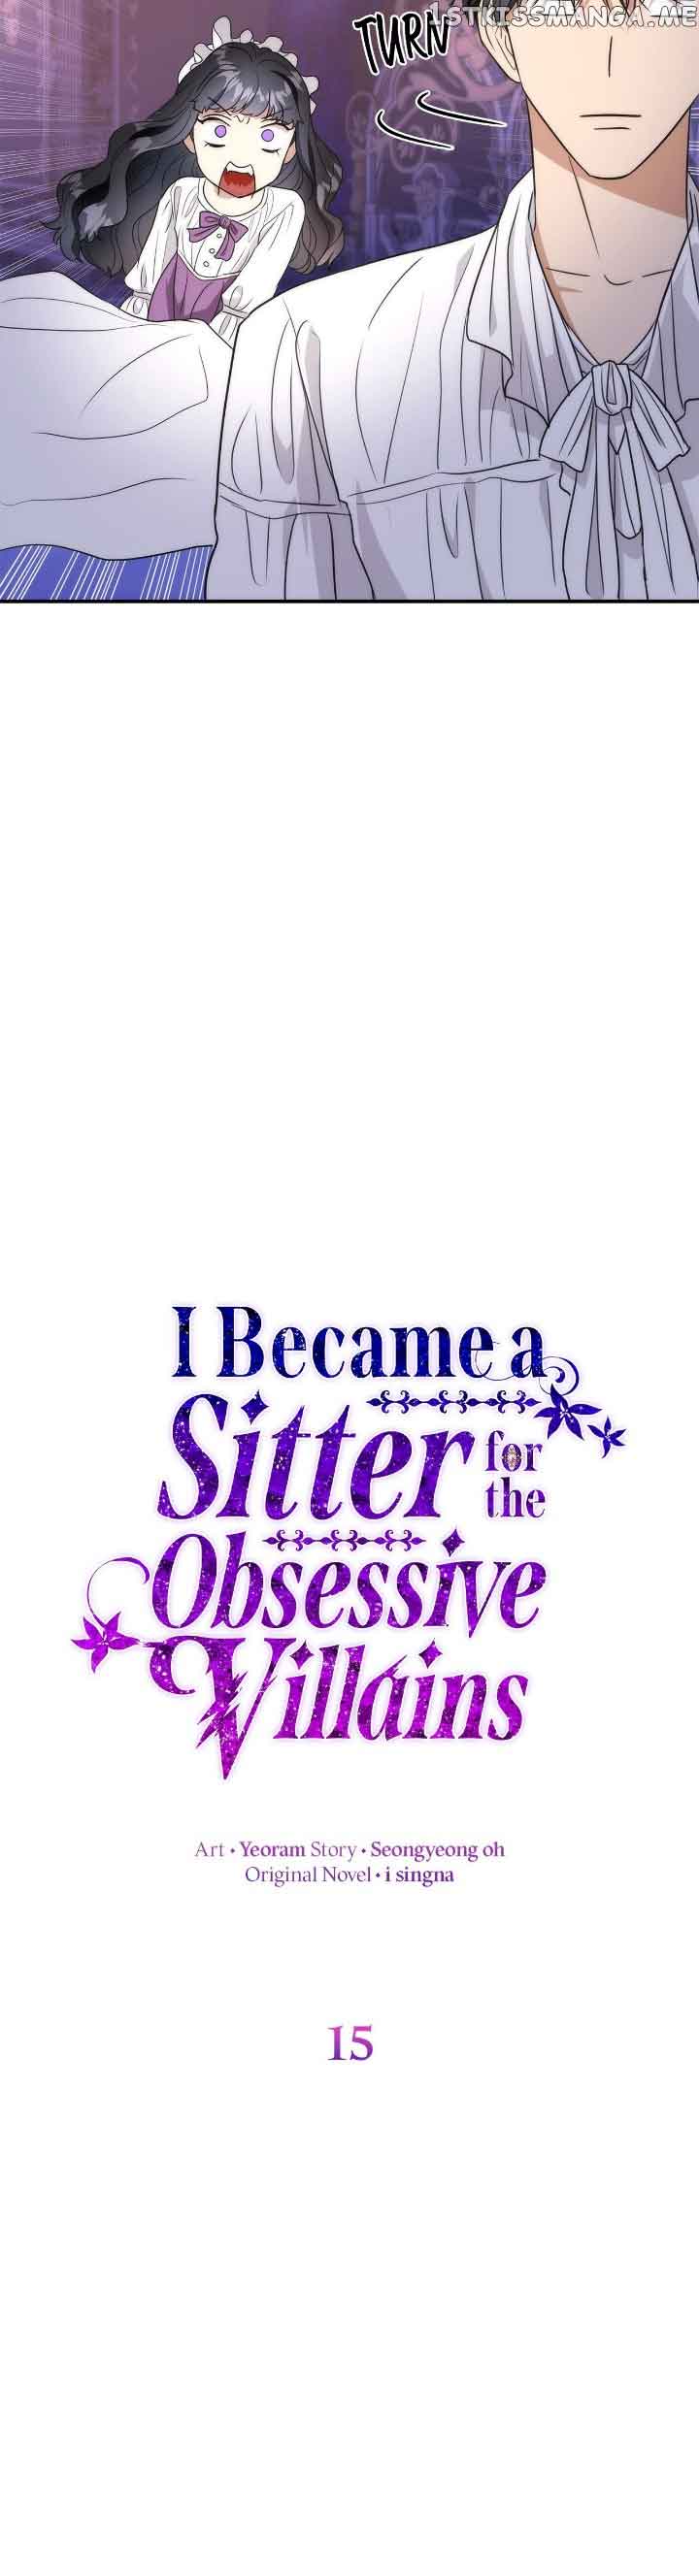 I Became a Sitter for the Obsessive Villains chapter 15